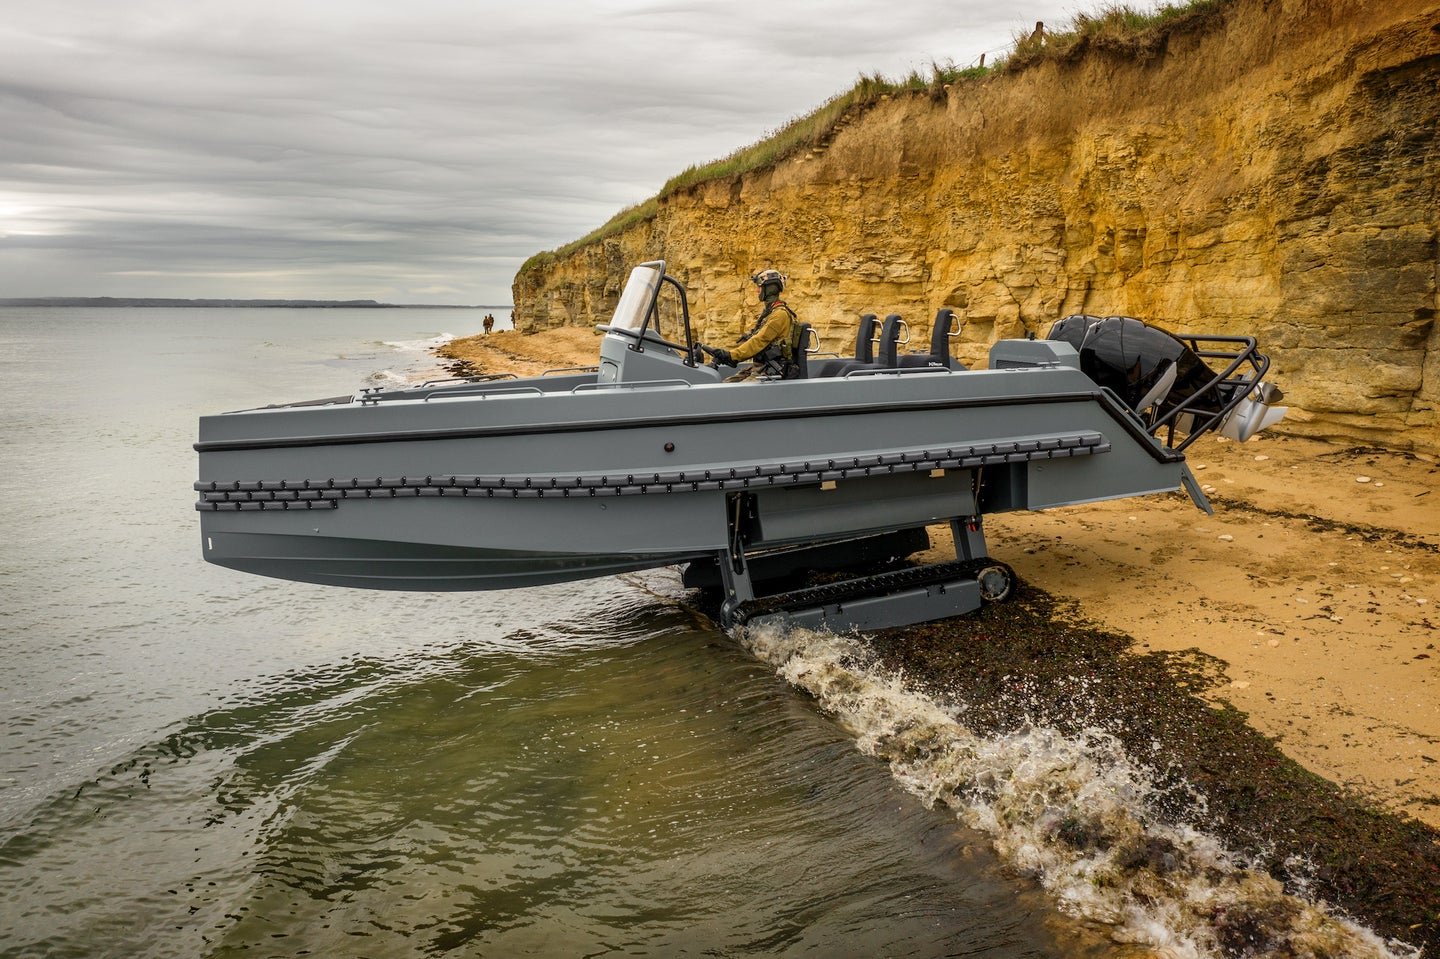 This fast French military boat moves from water to land without wheels